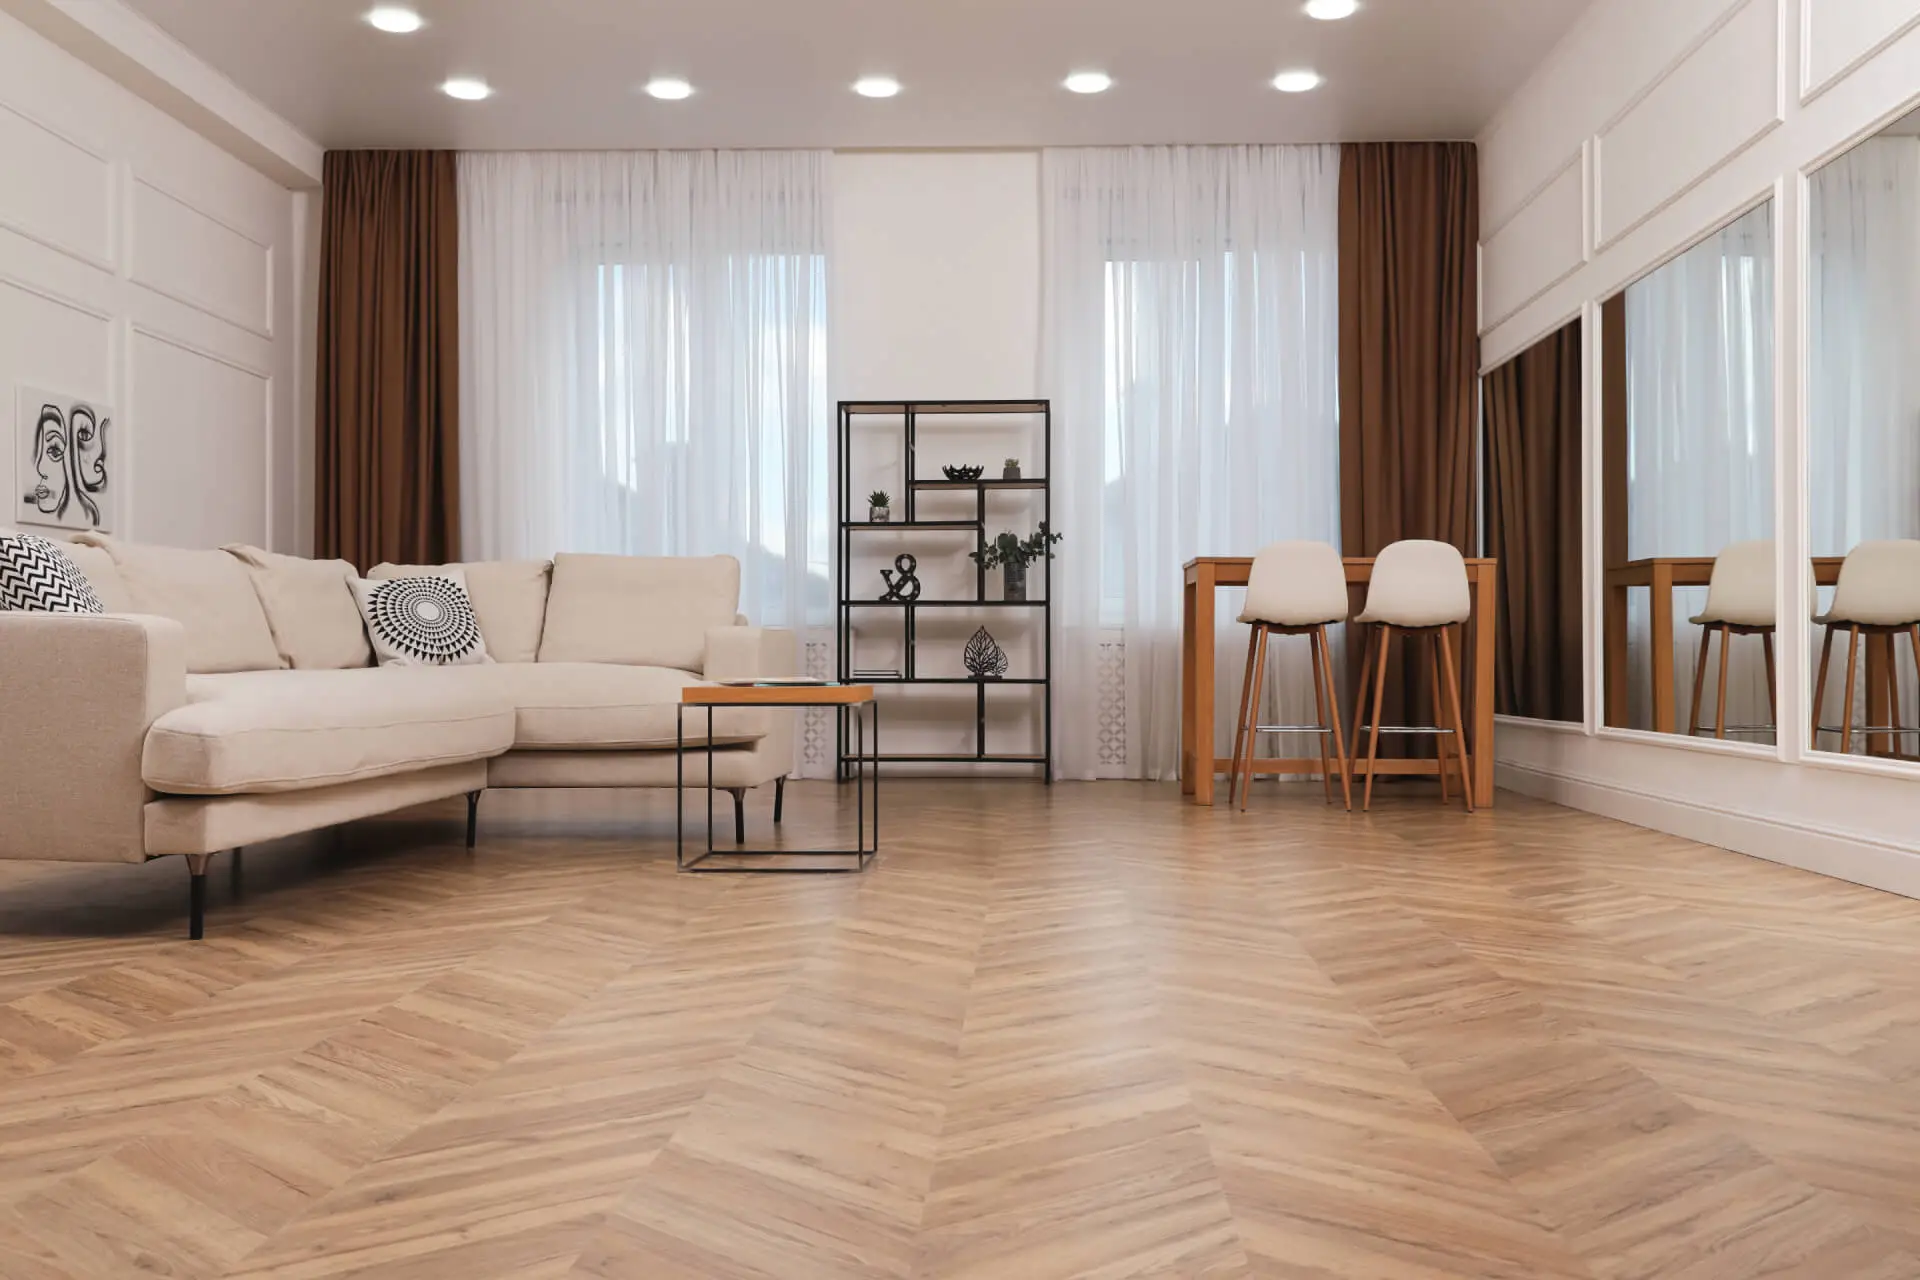 http://Quality%20Herringbone%20Flooring%20from%20One%20Step%20Beyond%20Flooring%20installed%20at%20a%20living%20room